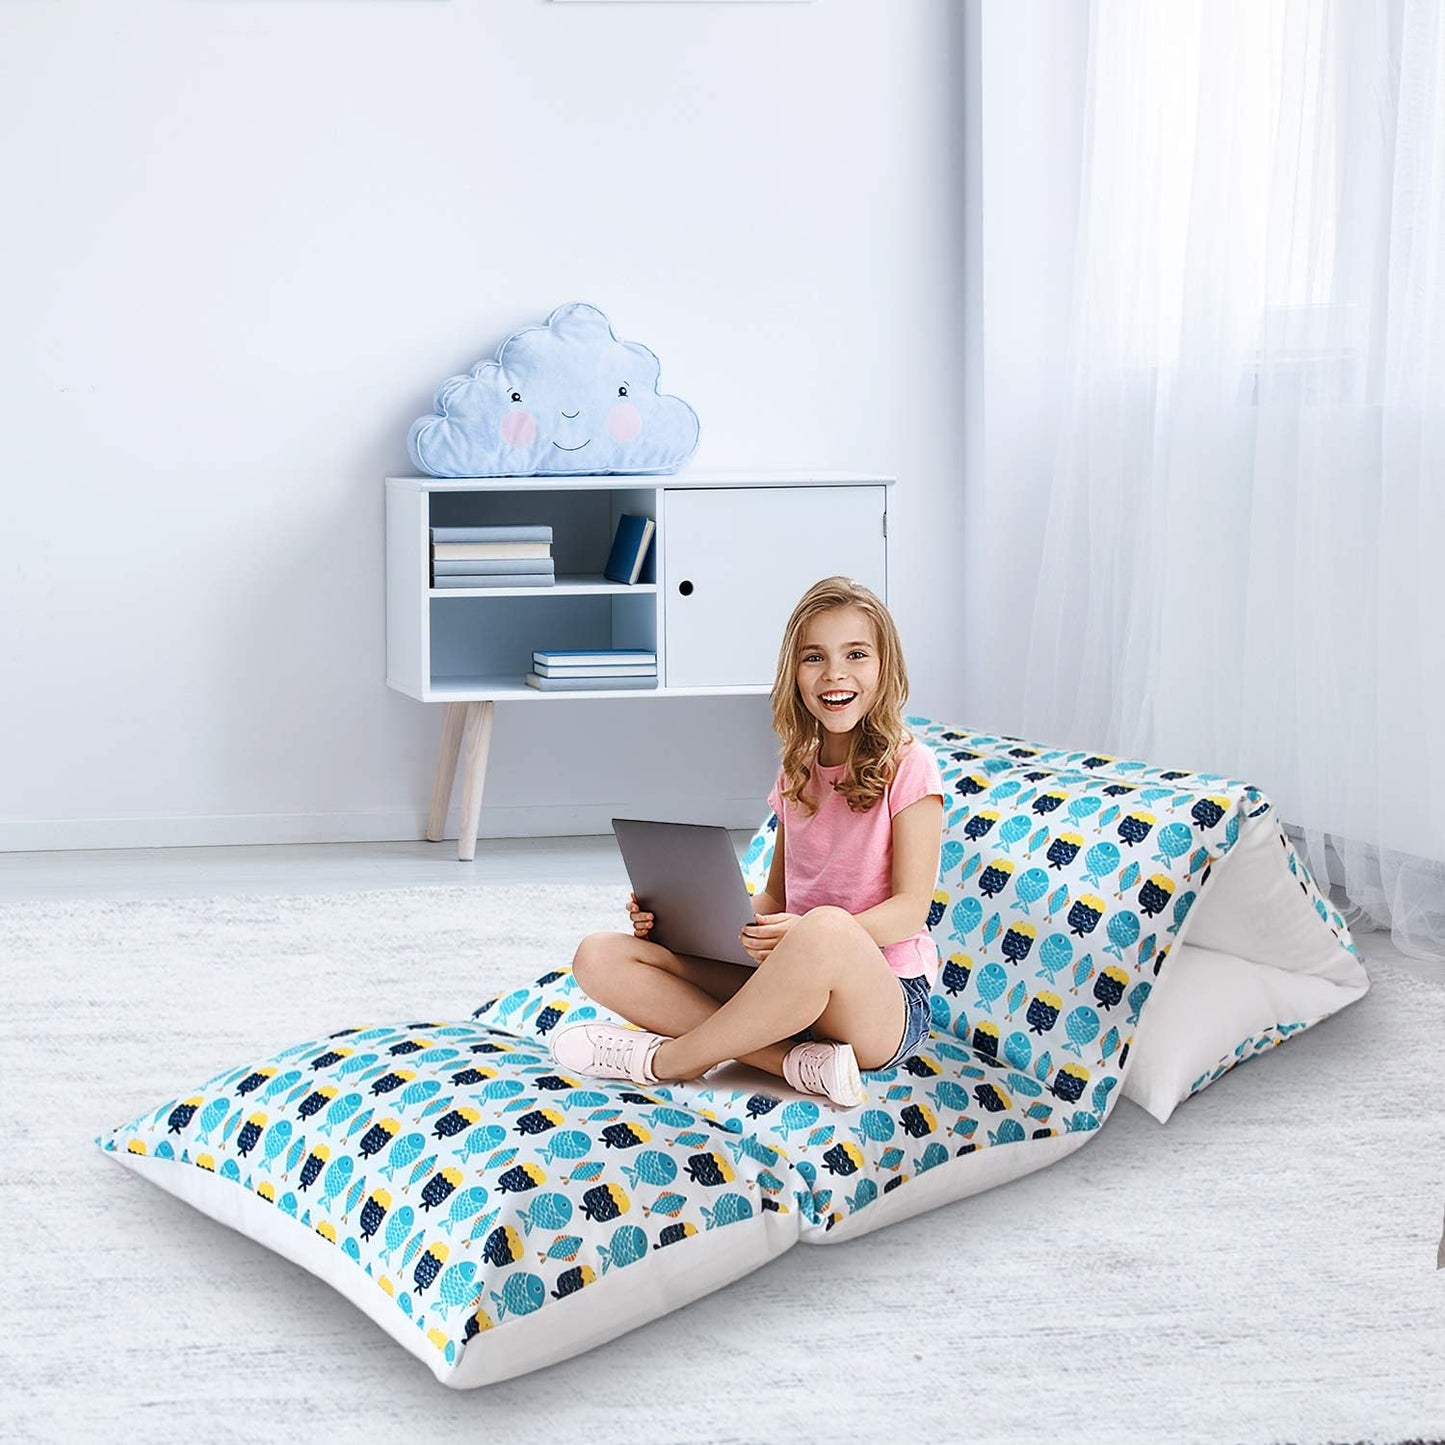 Kids Pillow Bed Floor Lounger Cover, Non-Slip and Super Soft, Queen/King Size, Fish - Biloban Online Store